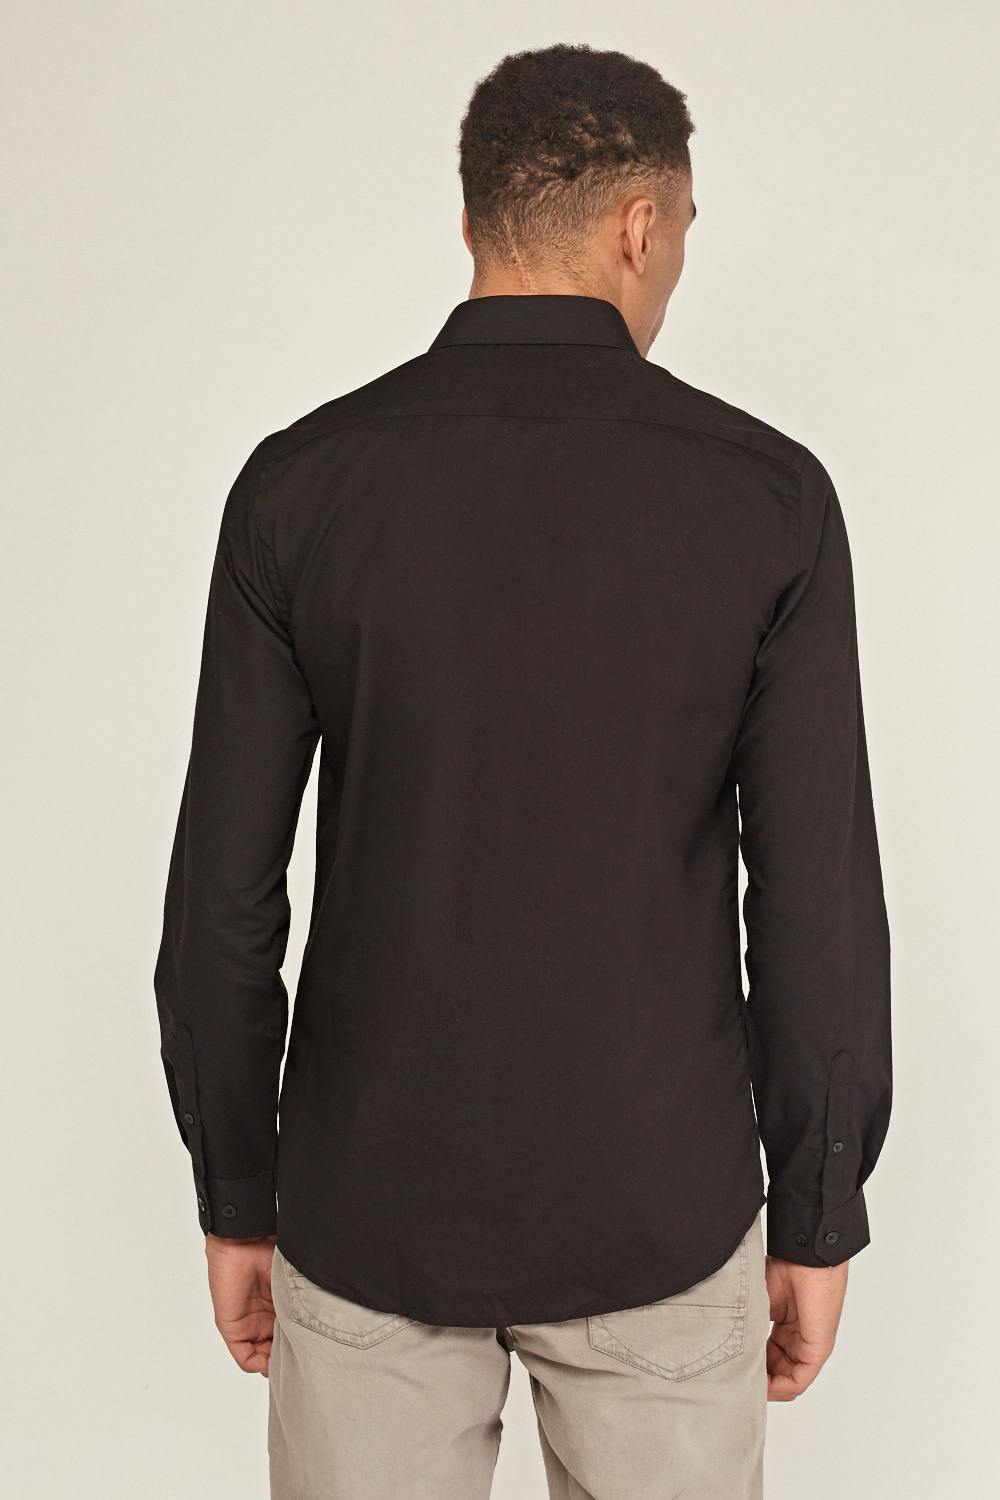 Long Sleeve Fitted Shirt - Just $7